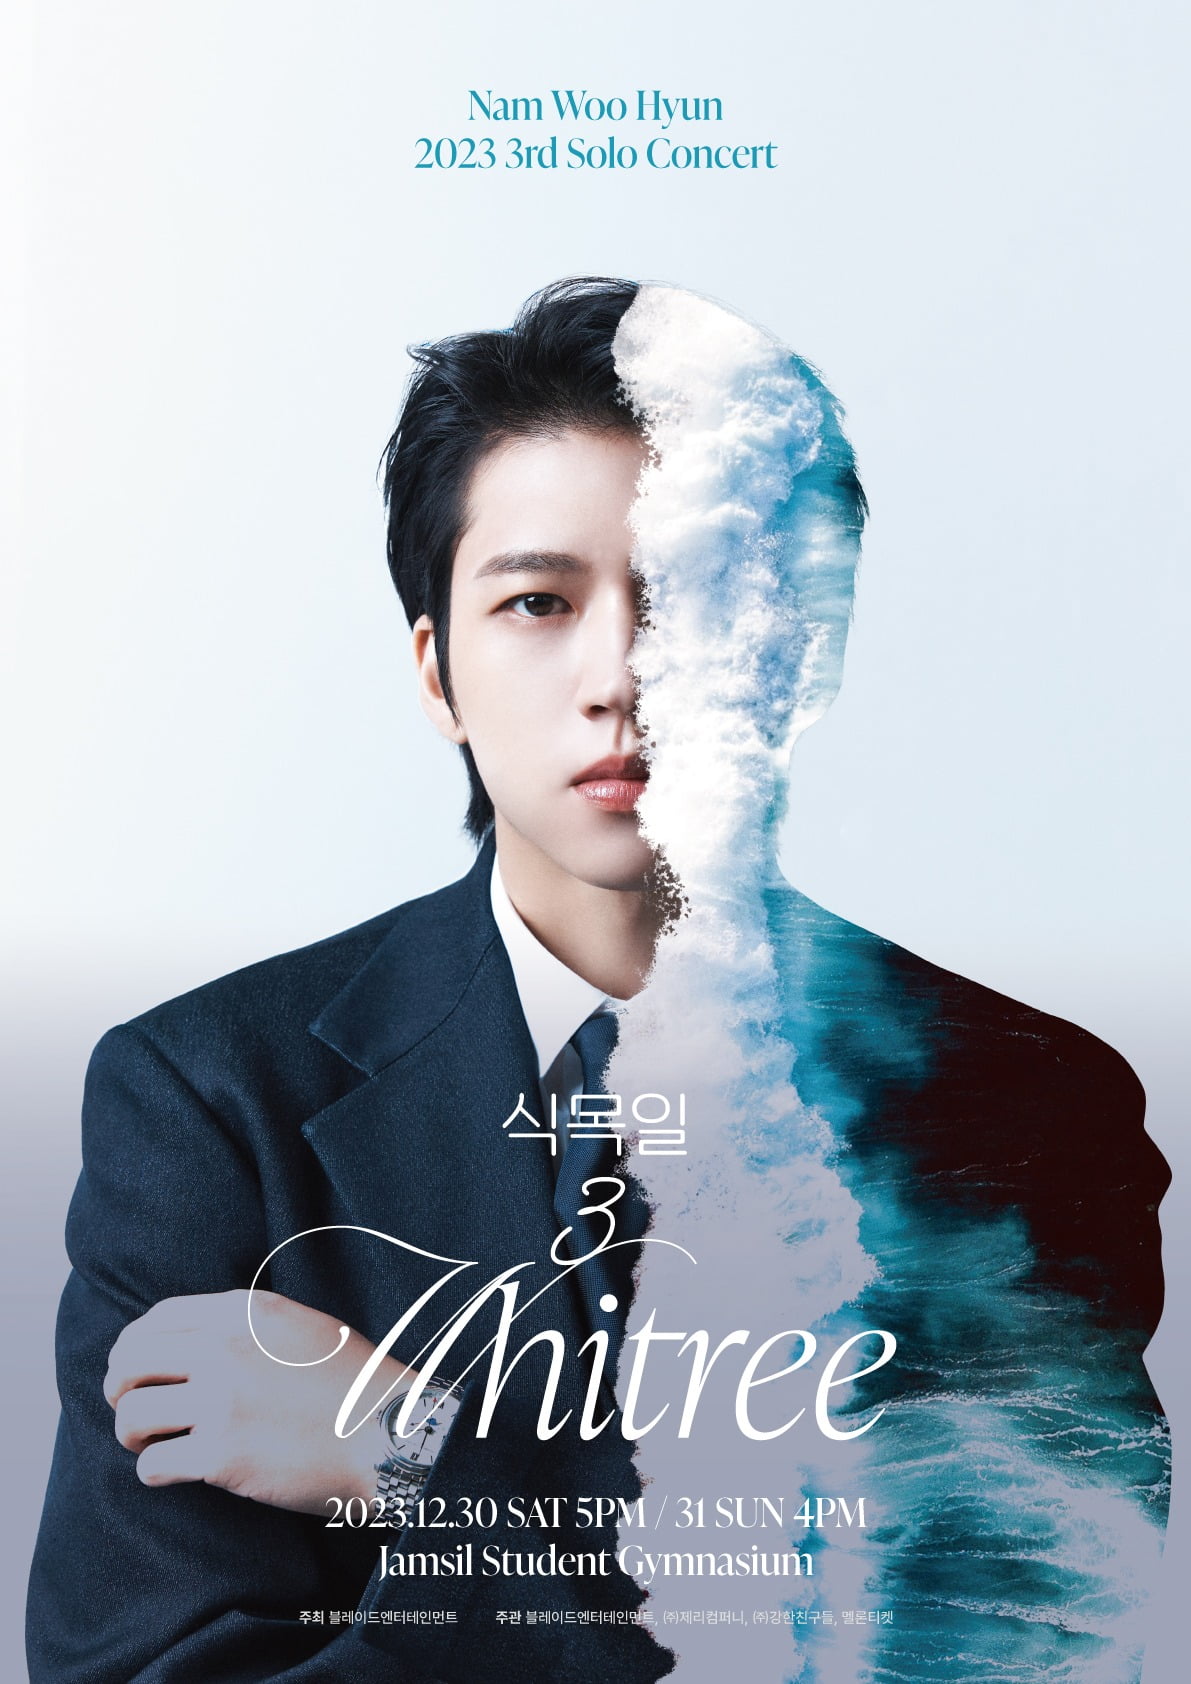 Nam Woohyun's solo concert in two years sold out in three minutes.